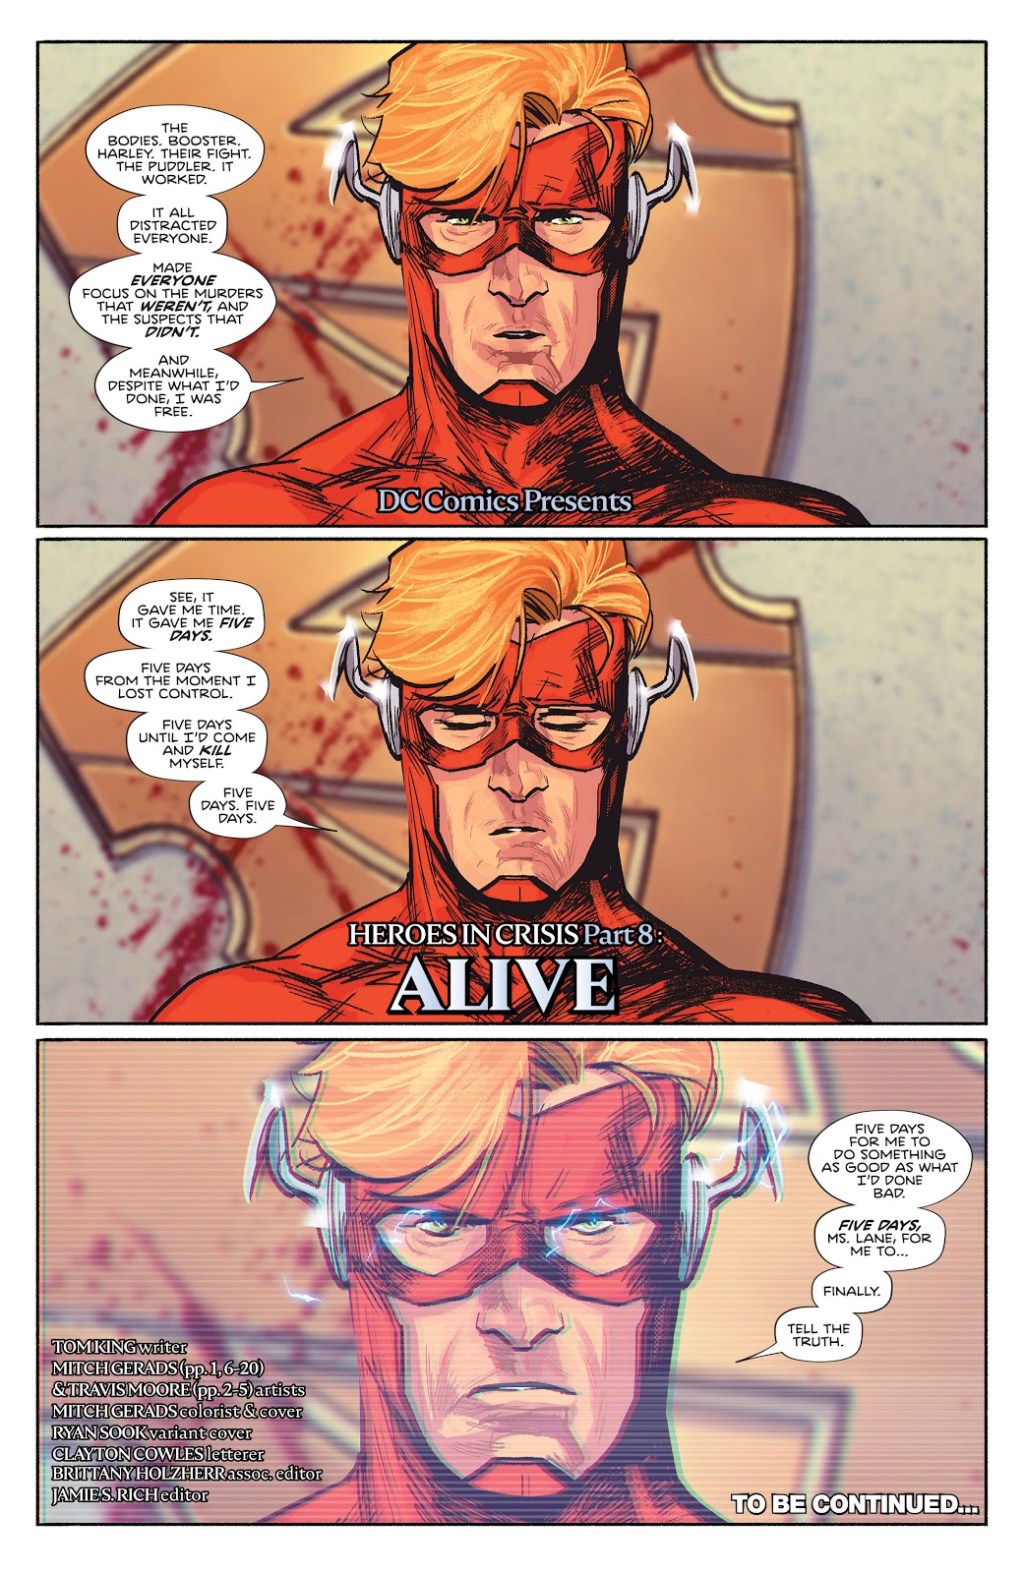 Wally West provides a taped confession of his crimes to Lois Lane in Heroes in Crisis Vol. 1 #8 "Alive" (2019), DC Comics. Words by Tom King, art by Mitch Gerads.